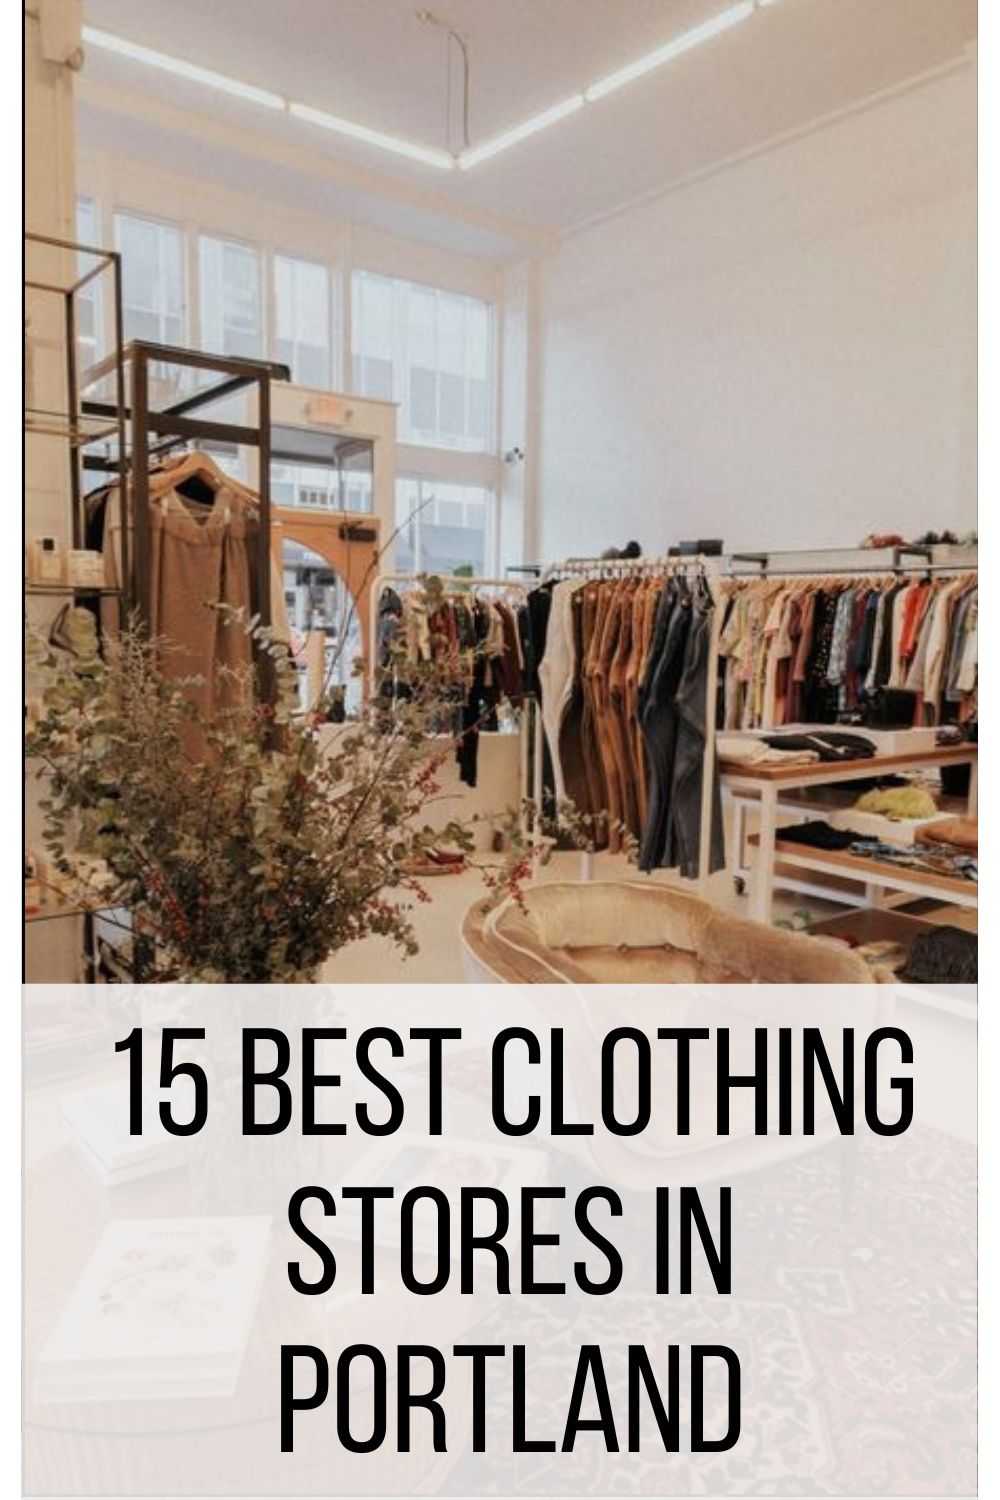 15 Best Clothing Stores in Portland